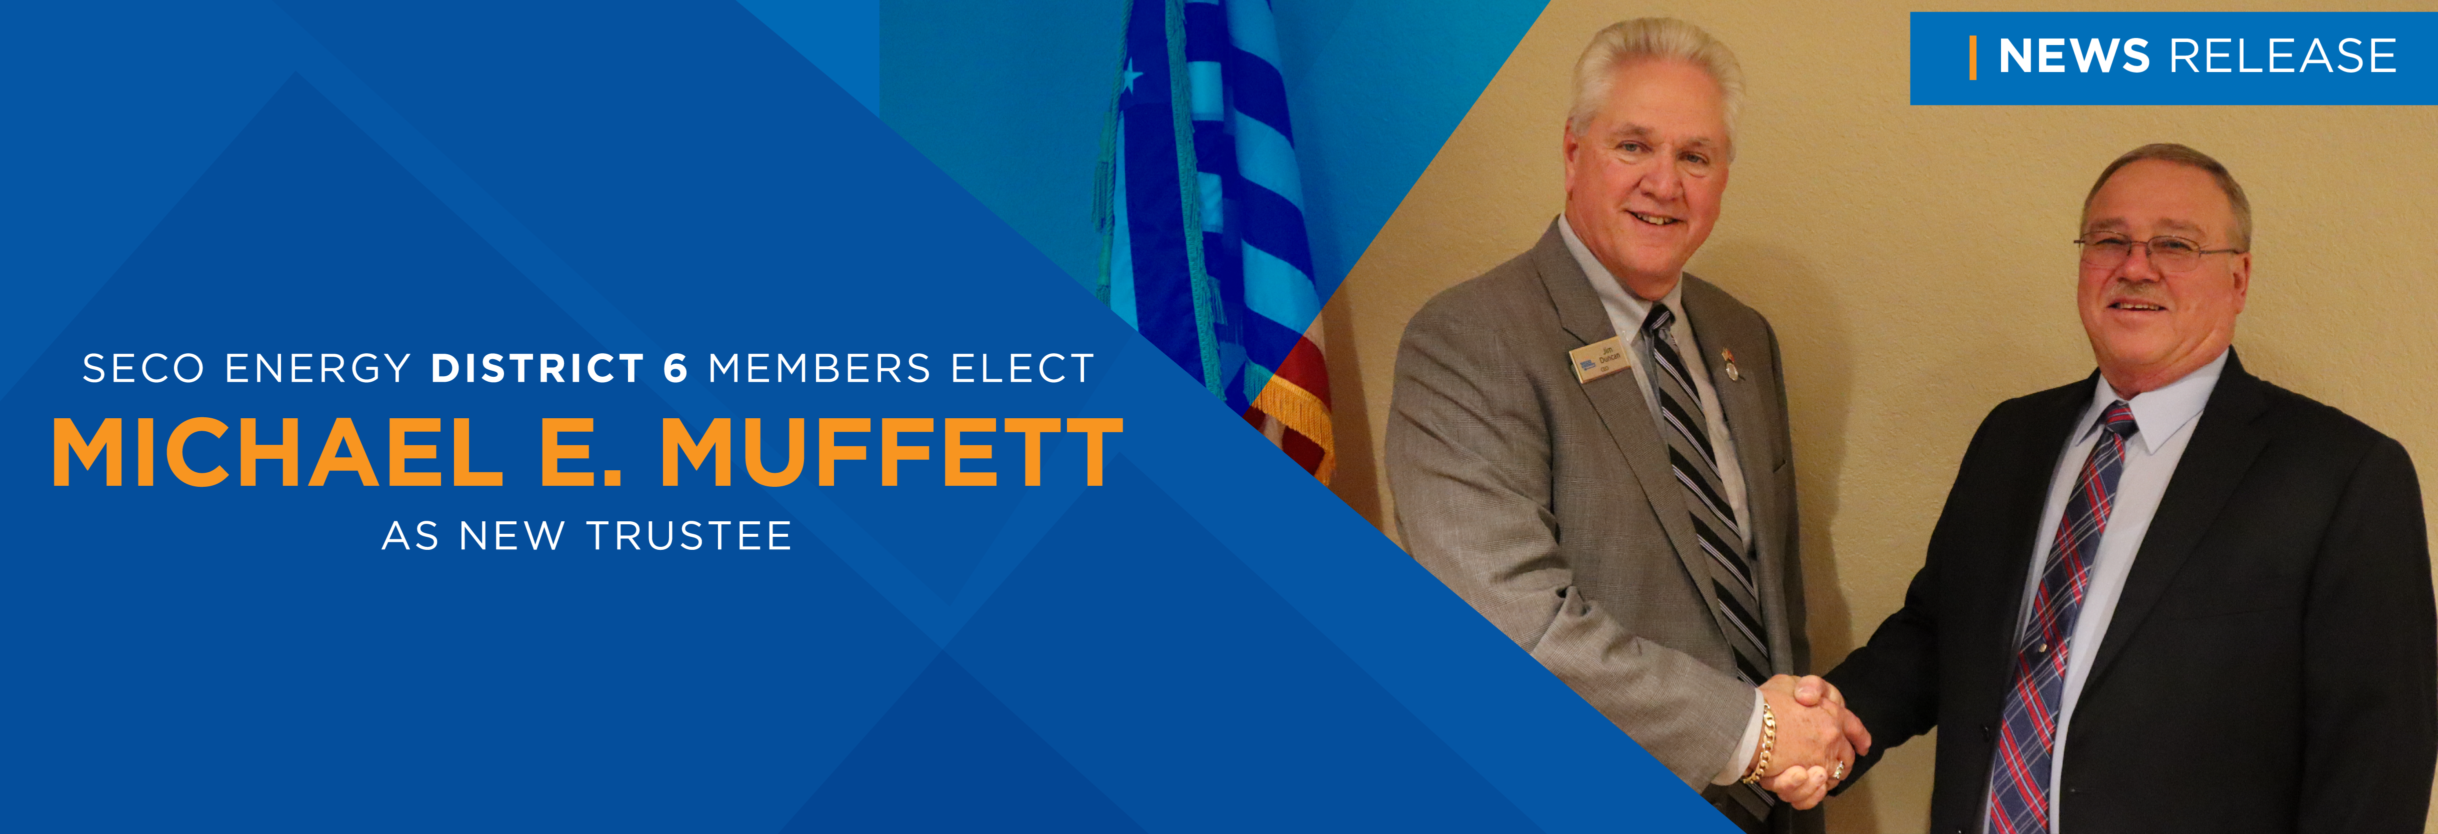 SECO Energy District 6 Members Elect Michael E. Muffett as New Trustee